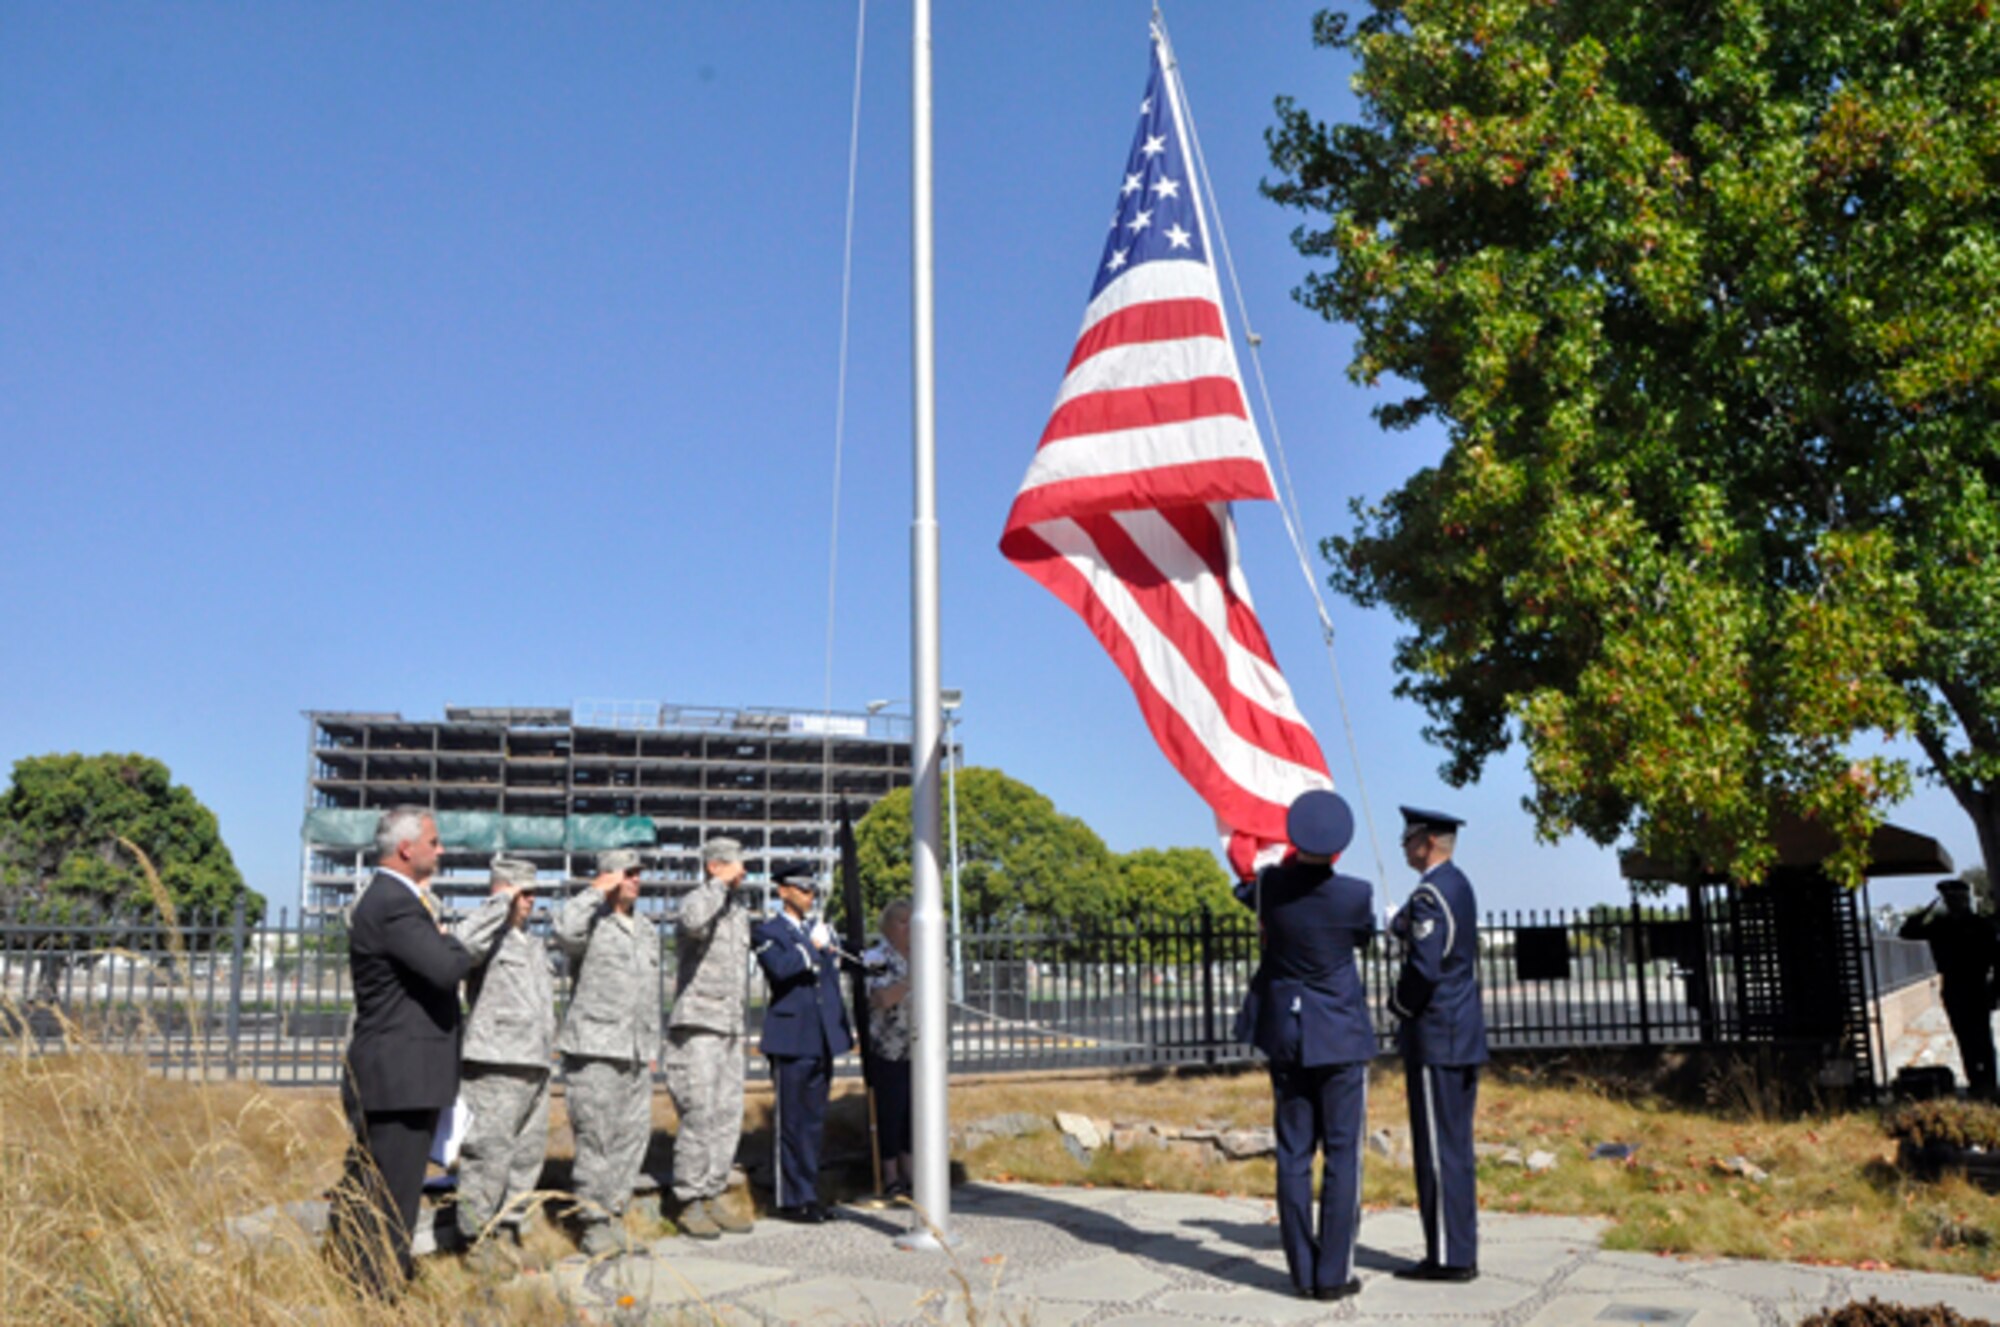 SUNNYVALE, Calif. -Members of the Travis Air Force Base Honor Guard lower the flag during the closing ceremonies at the former Onizuka Air Force Station on Thursday, Sept. 15, 2011.